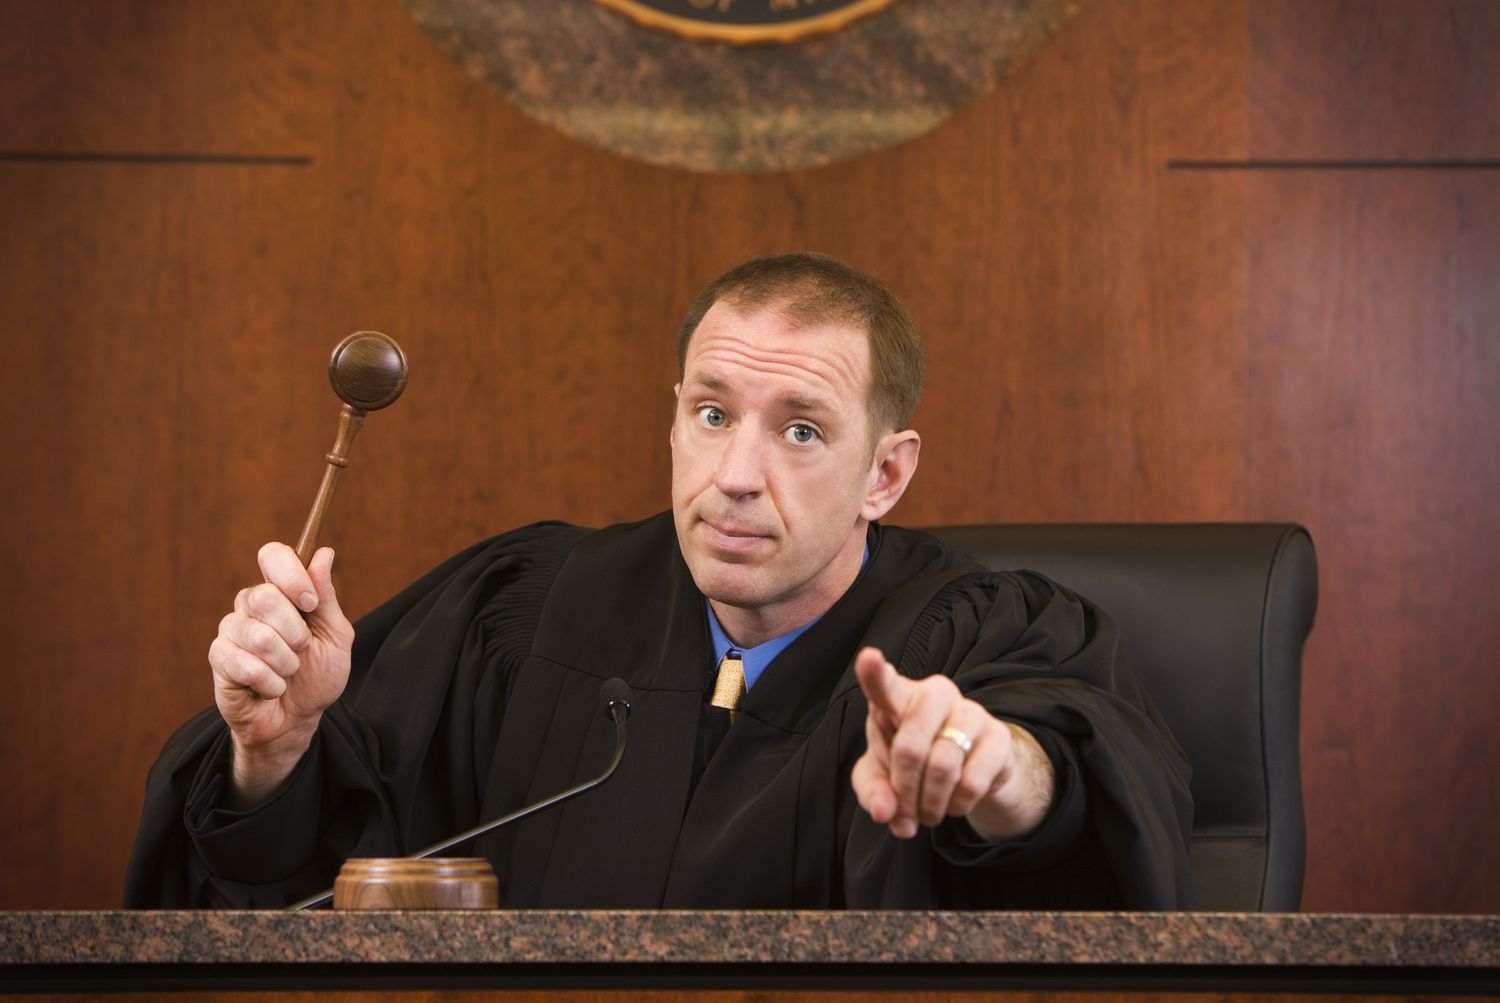 Which Is The Educational Requirement For Judges, Prosecutors, And Defense Attorneys?